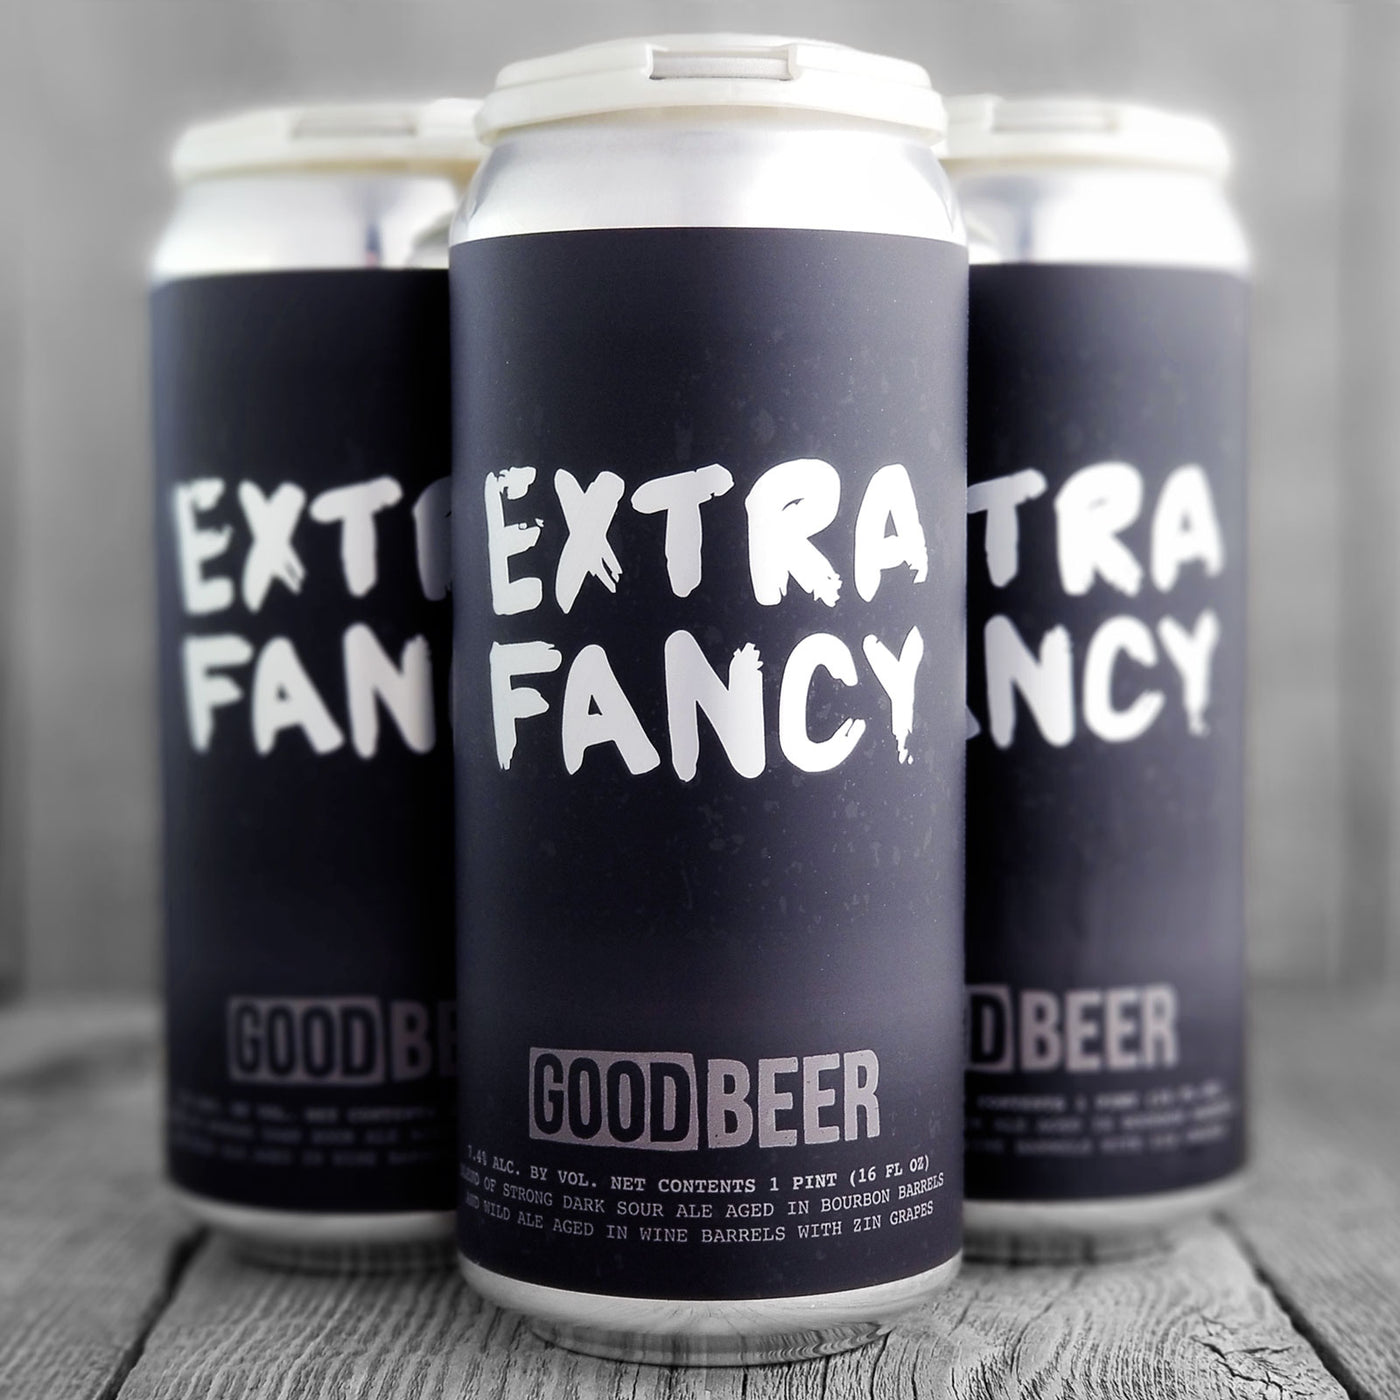 The Good Beer Extra Fancy